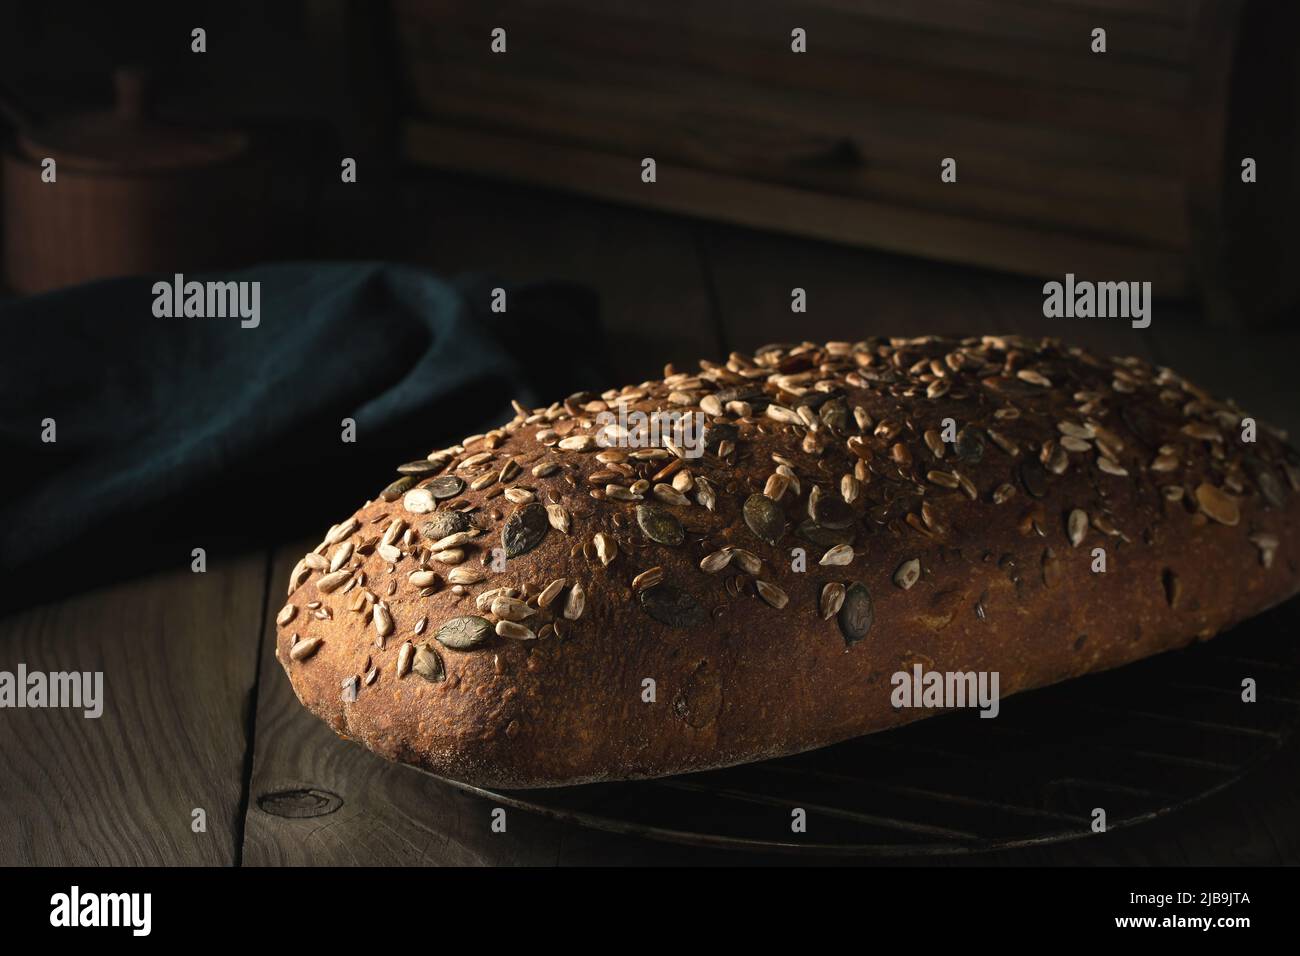 Loaf of homemade whole grain bread with seeds cool down on a wire rack on a wooden table. Stock Photo